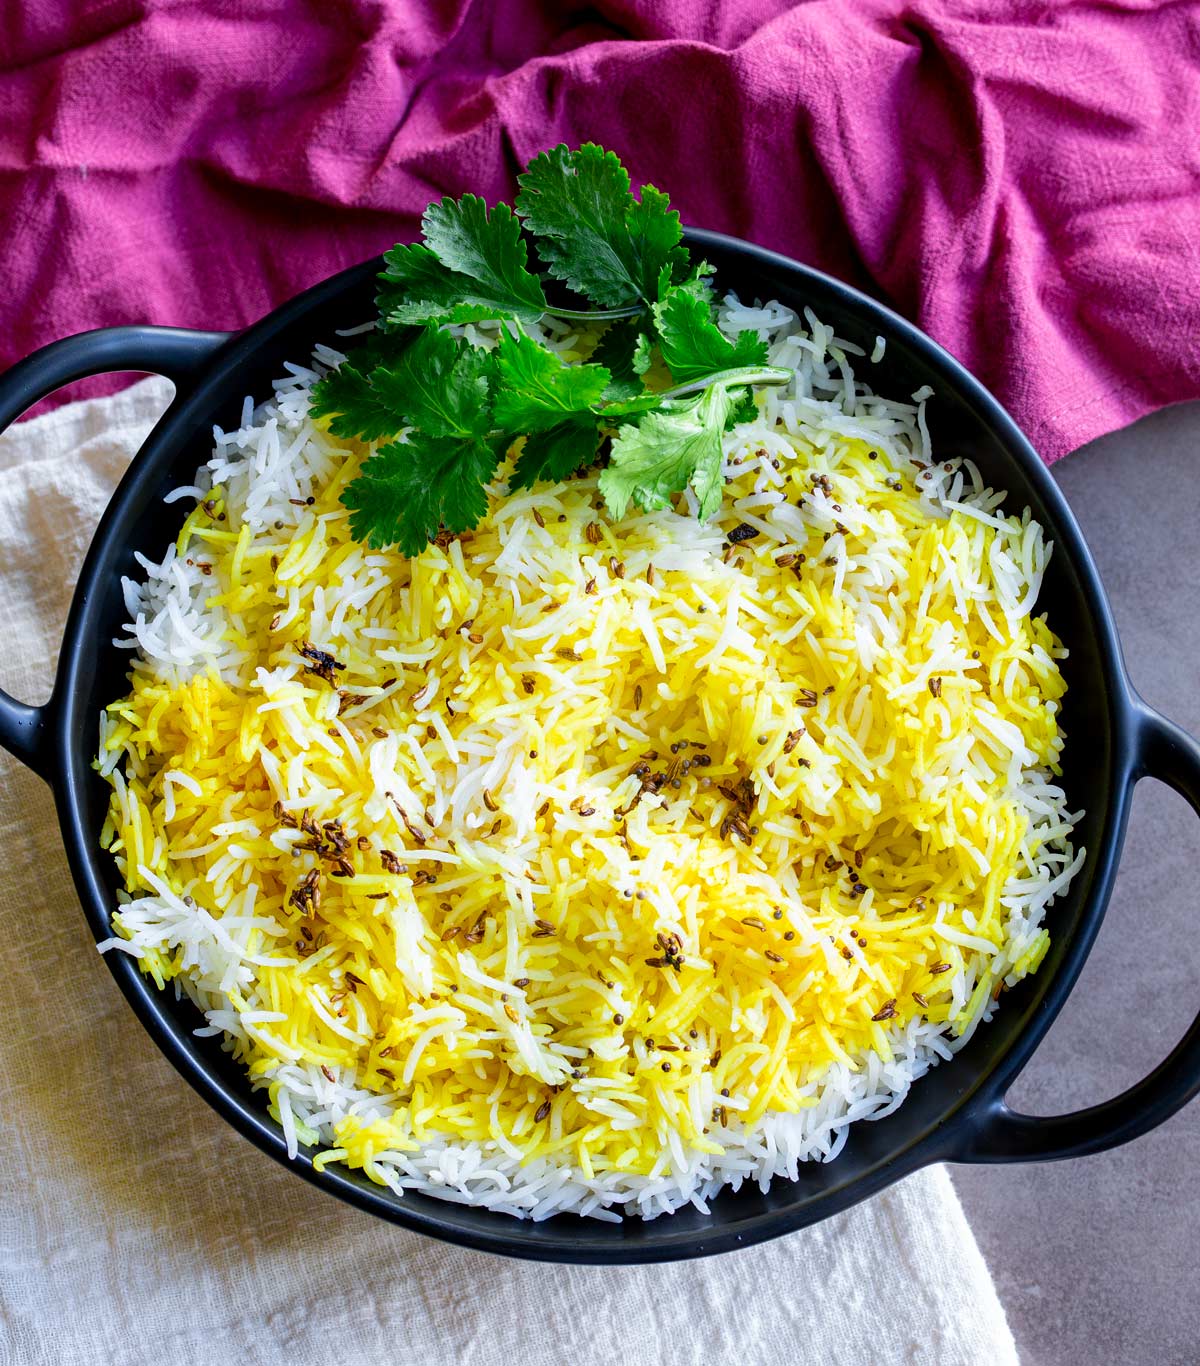 white and yellow basmati rice in a black bowl